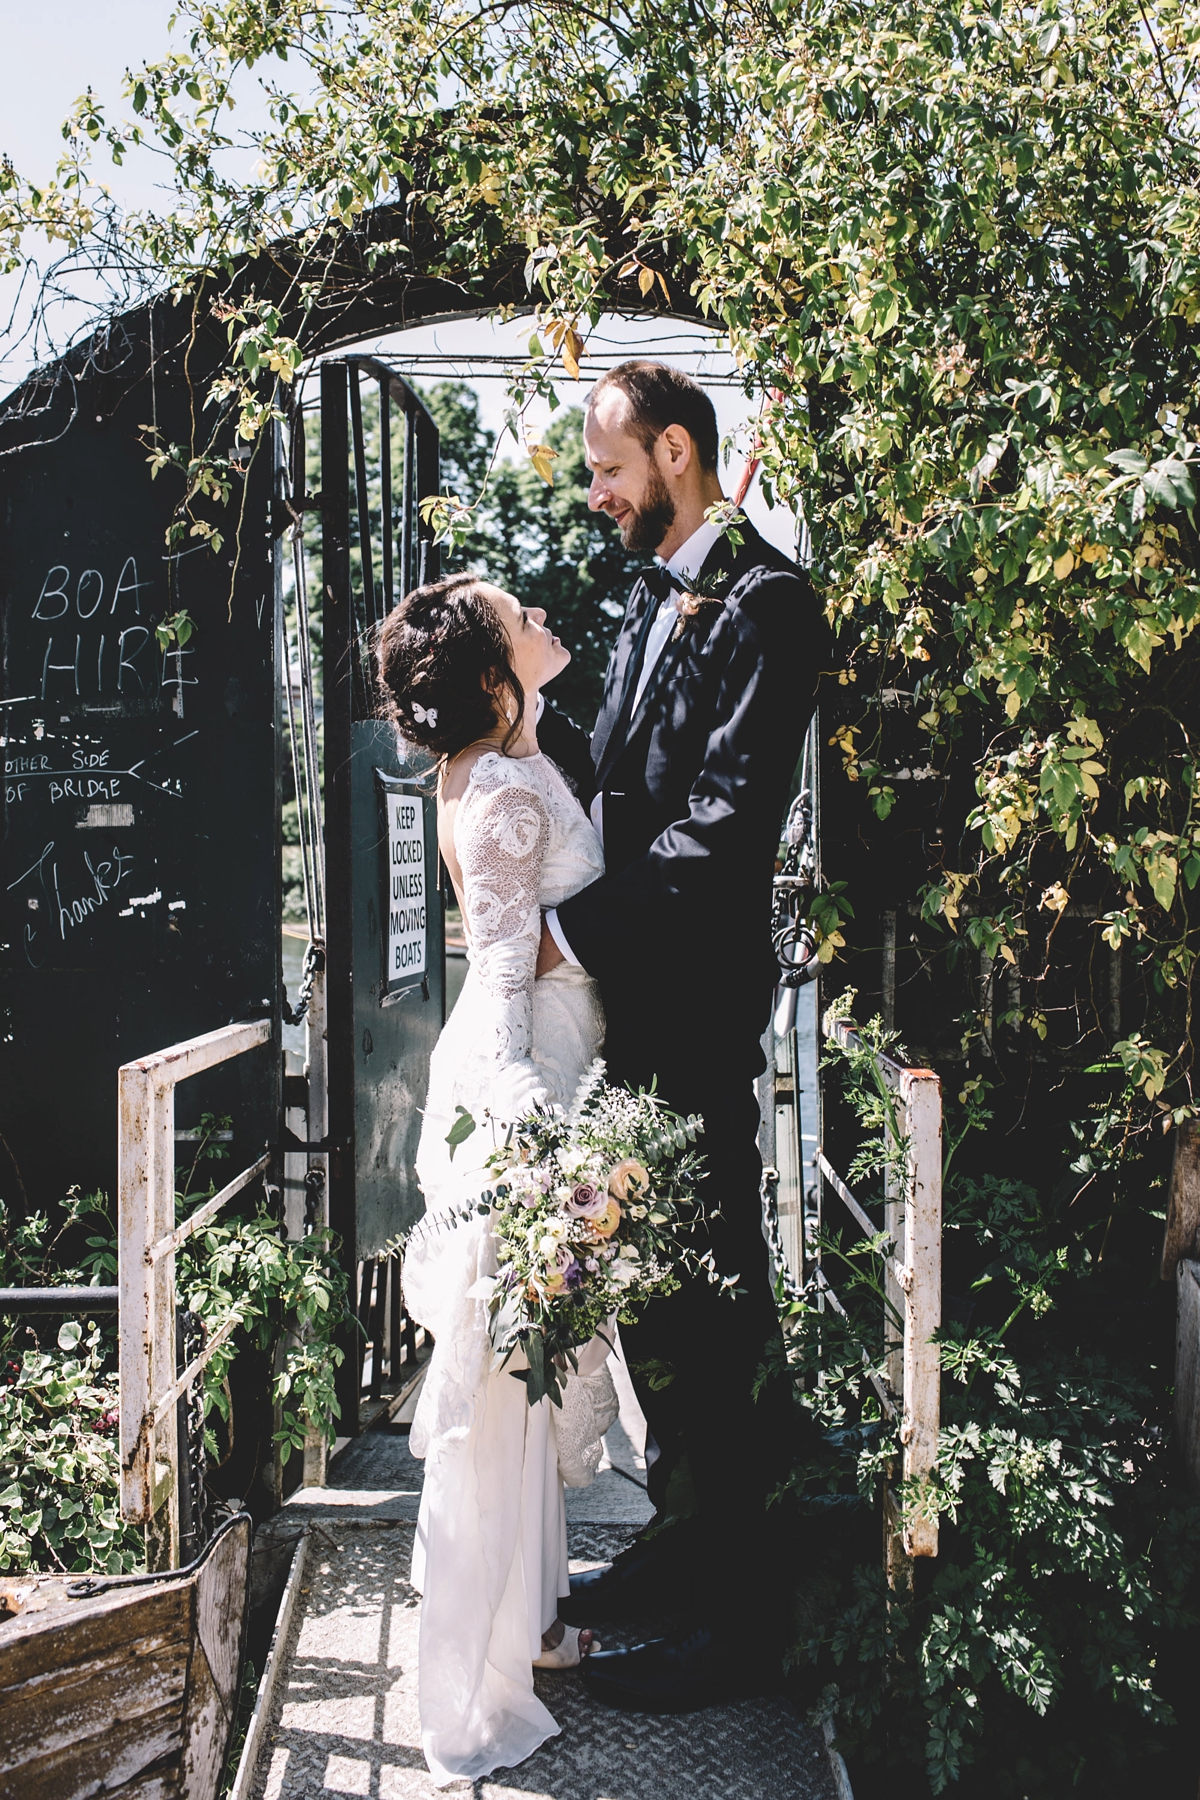 2 A Grace Loves Lace gown for a DIY garden wedding inspired by nature and flowers 1